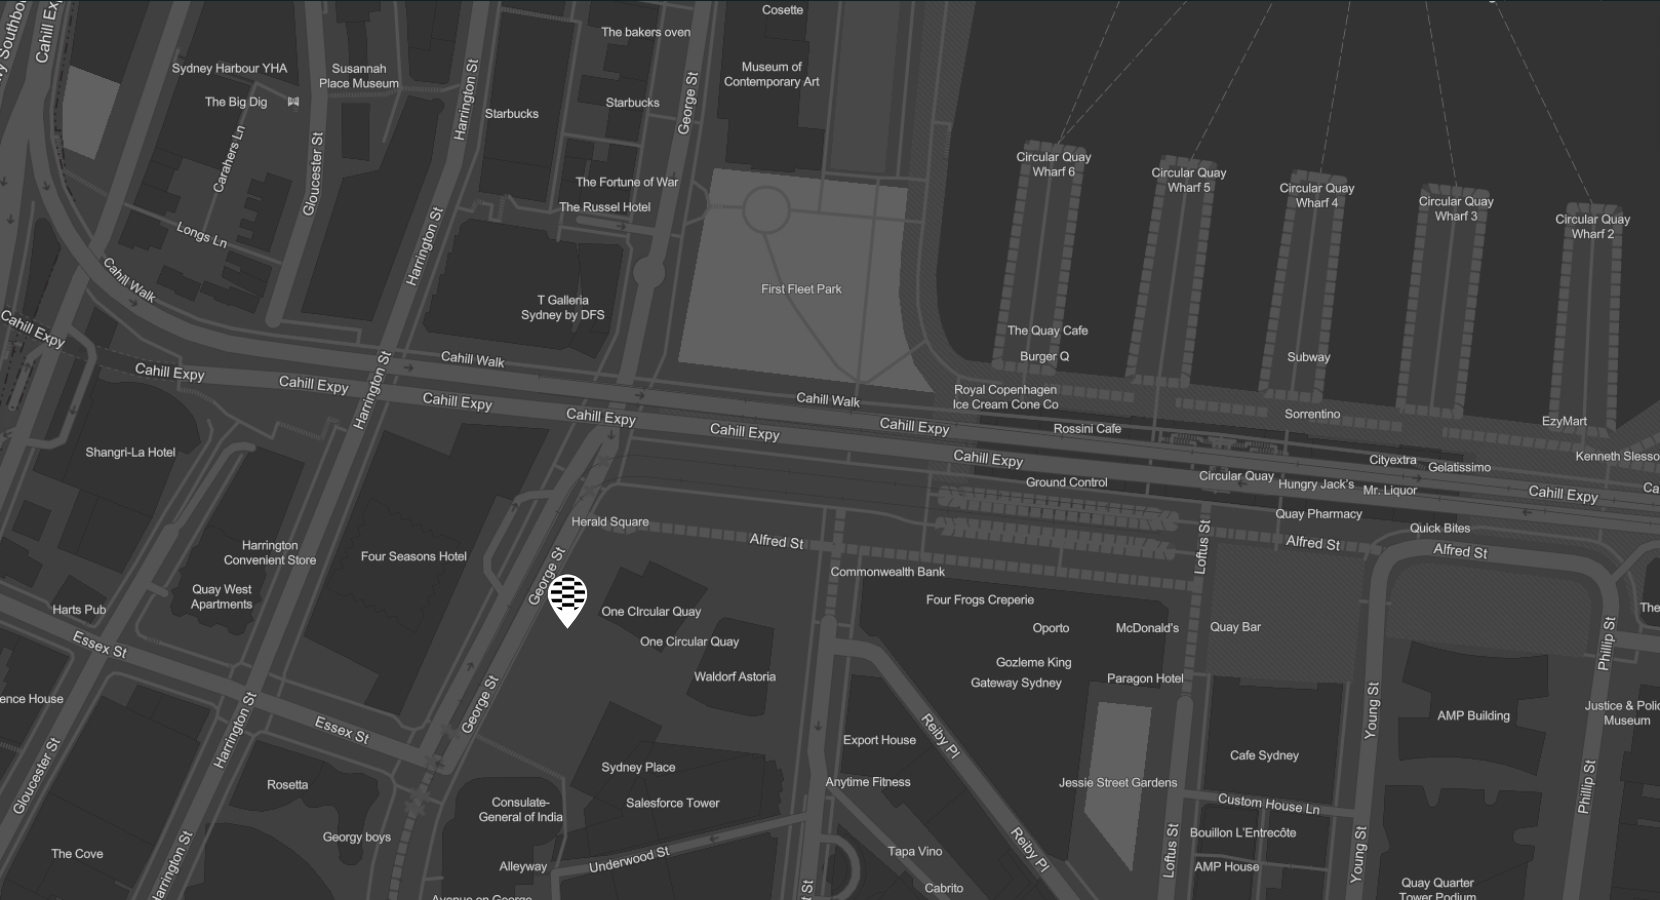 Image of a location map of the Sydney CBD showing a tag with the location of the iconic Jacksons on George, which offers a public bar, bistro and rooftop bar.